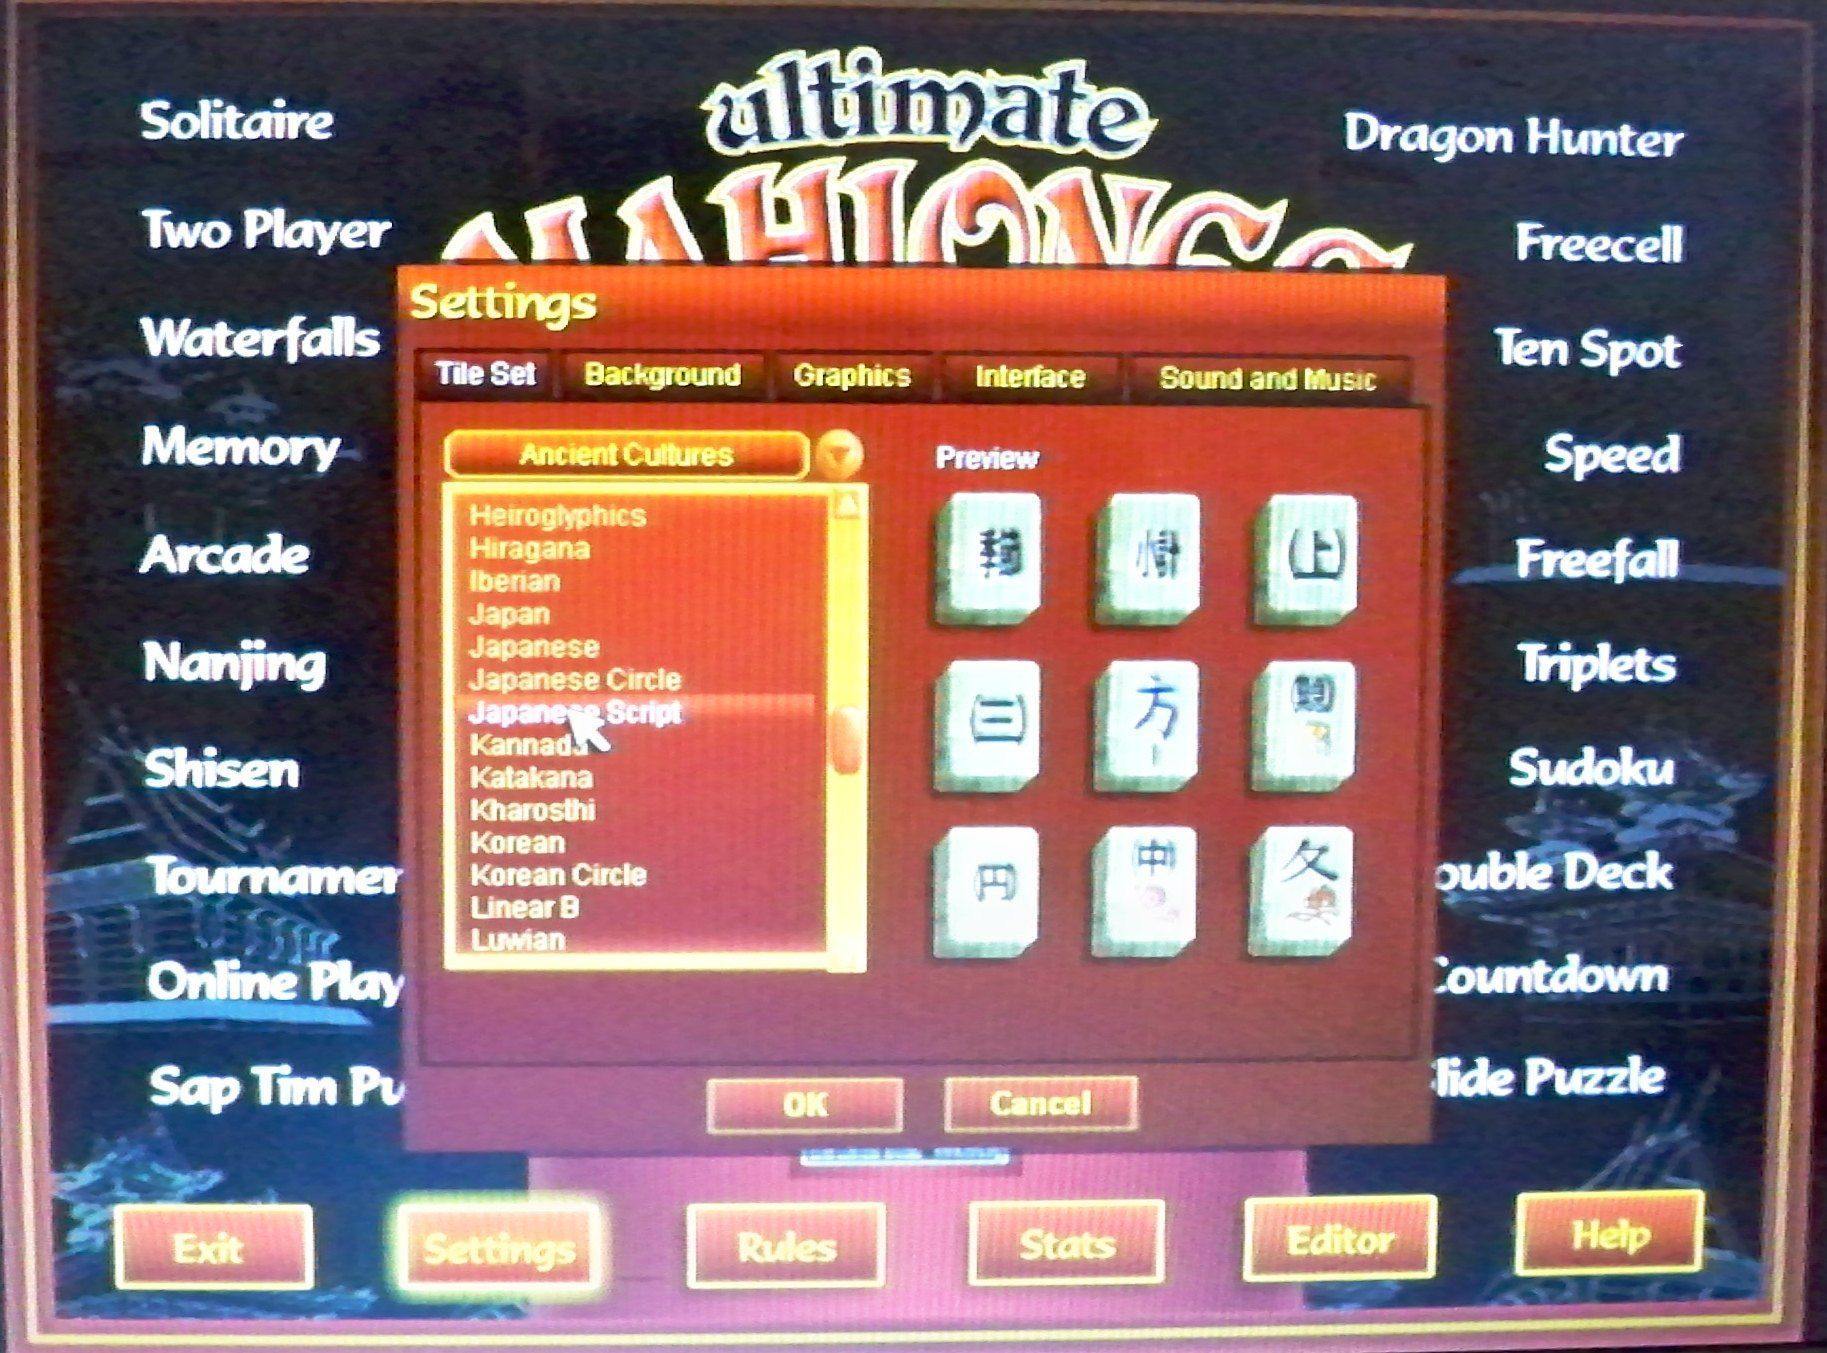 instal the new for windows Mahjong Deluxe Free